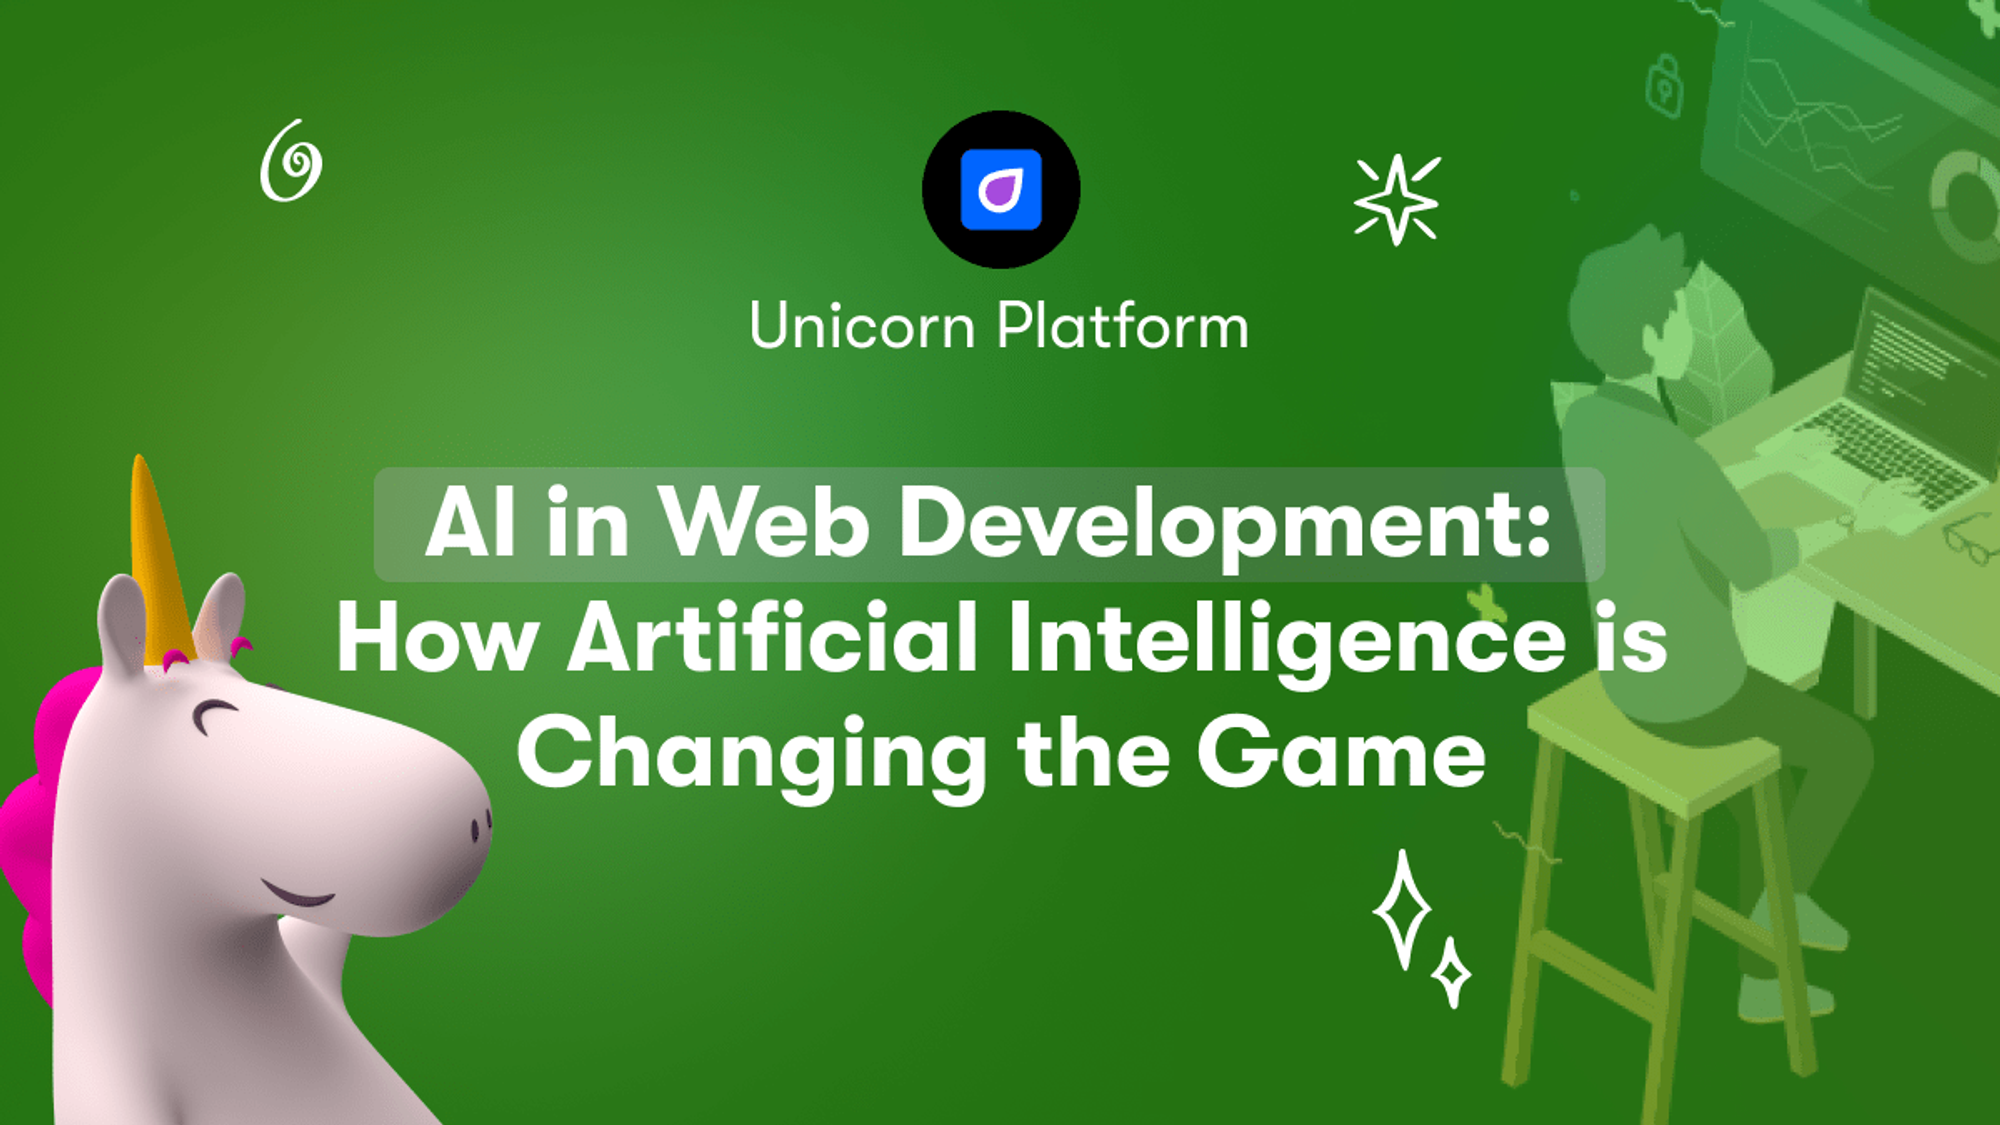 AI in Web Development: How Artificial Intelligence is Changing the Game